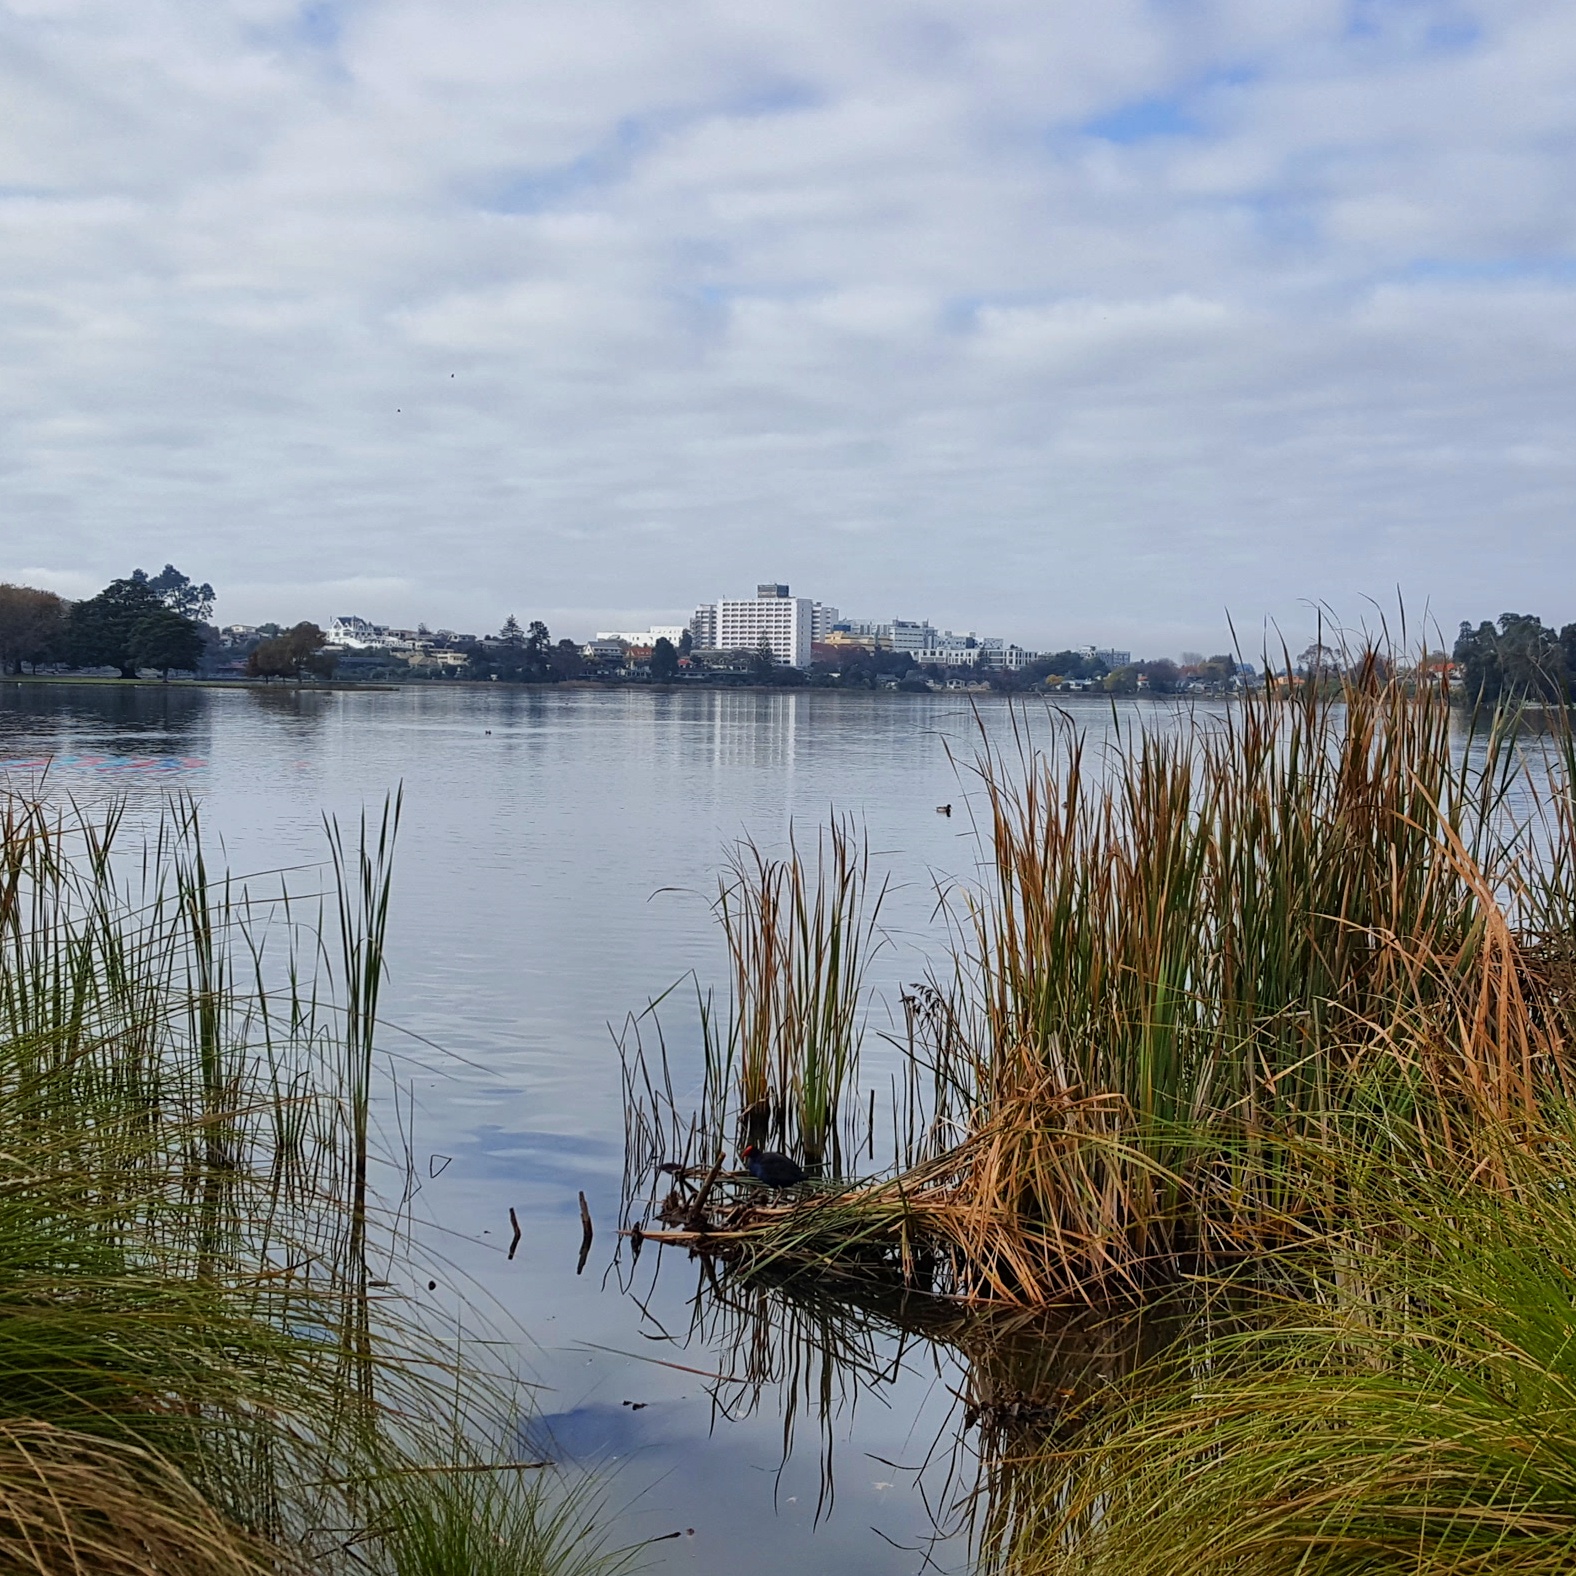 Lake with reeds and bulrushes in the foreground, city scape at back, clouds in grey sky.